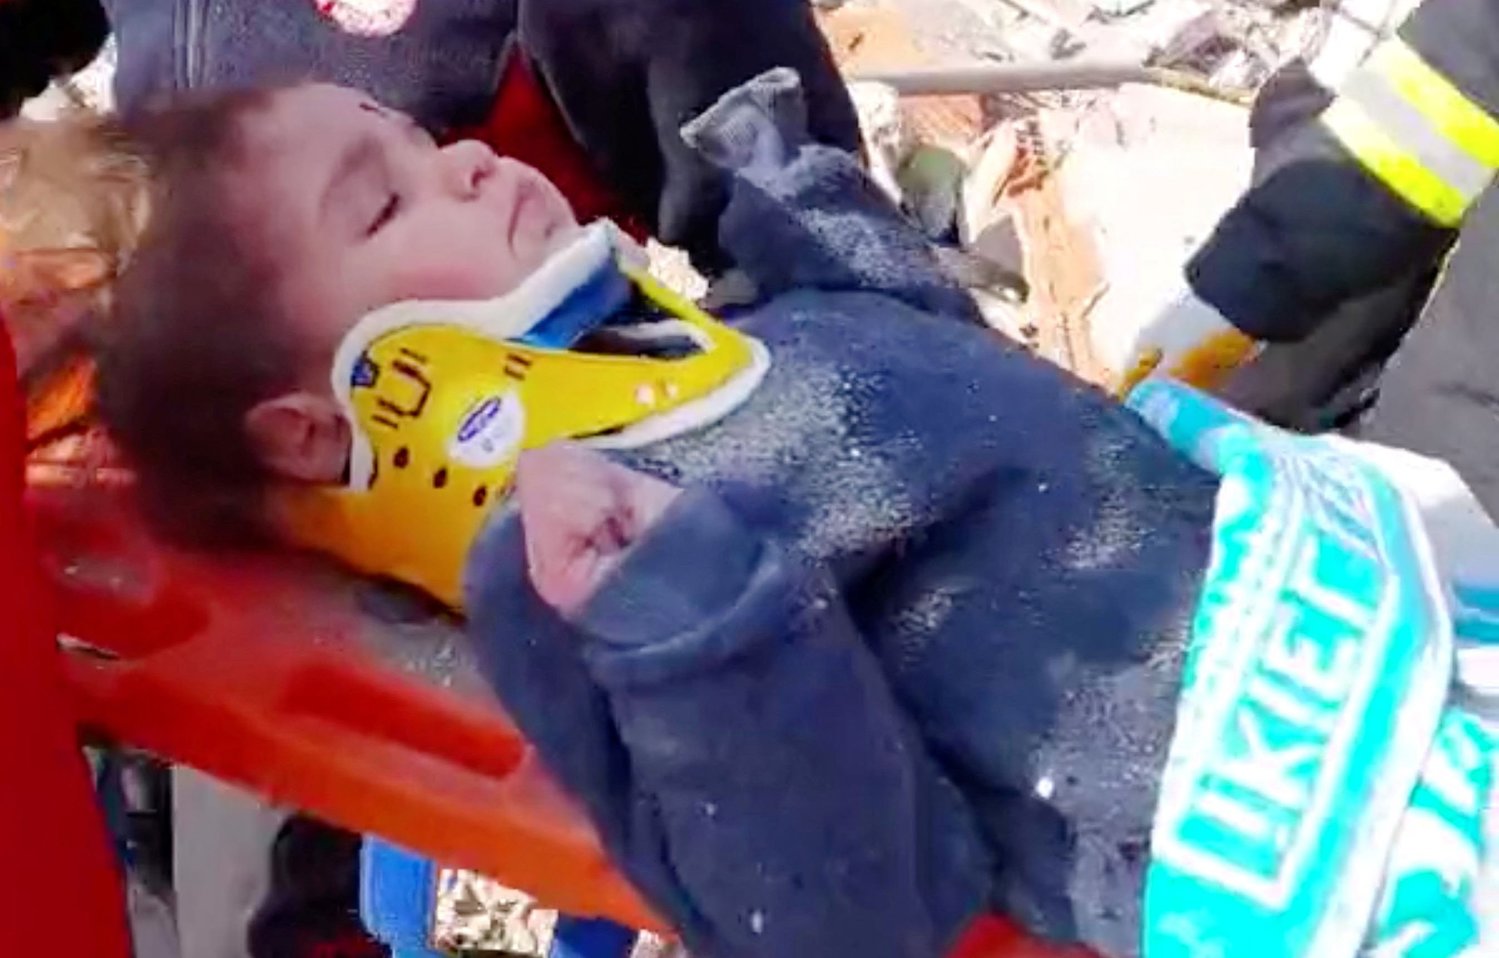 A child is rescued from the rubble Feb. 12, 2023, after 150 hours in the aftermath of an earthquake in Hatay, Turkey, in this screen grab taken from a handout video. The powerful 7.8 magnitude earthquake rocked areas of Turkey and Syria early Feb. 6, toppling hundreds of buildings and killing tens of thousands. (OSV News photo/Turkish Health Ministry handout via Reuters)